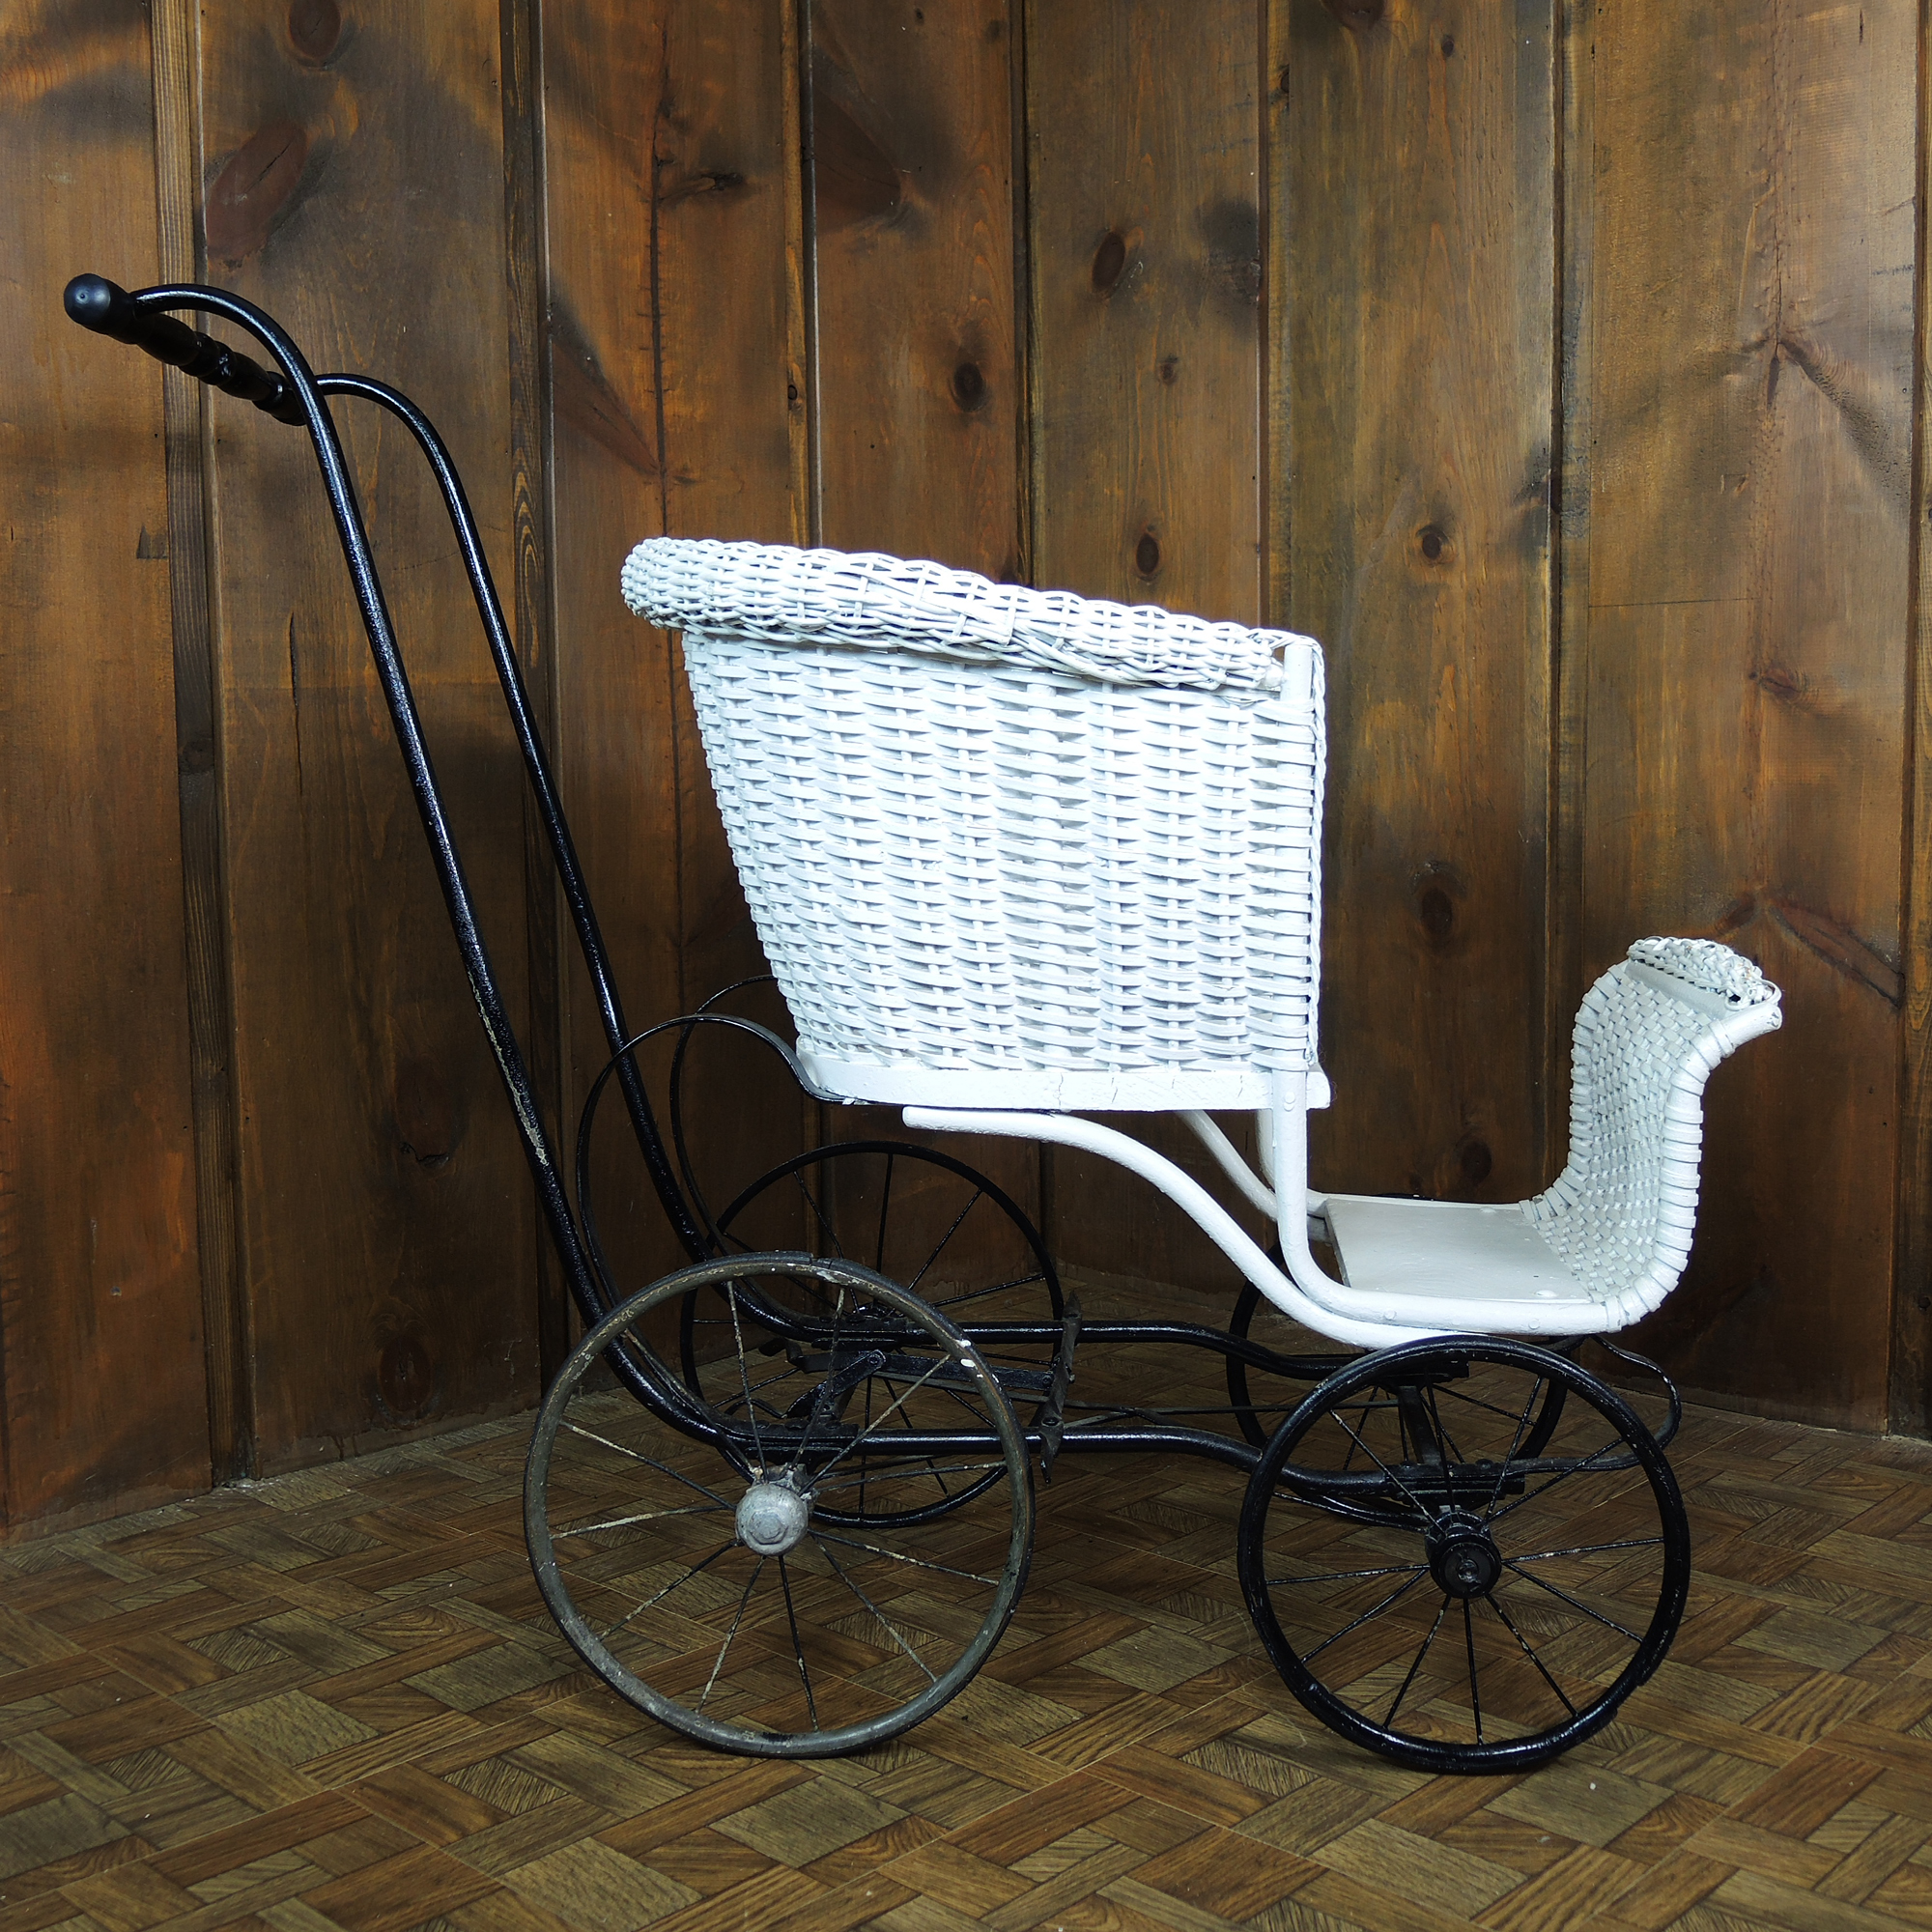 gendron baby carriage